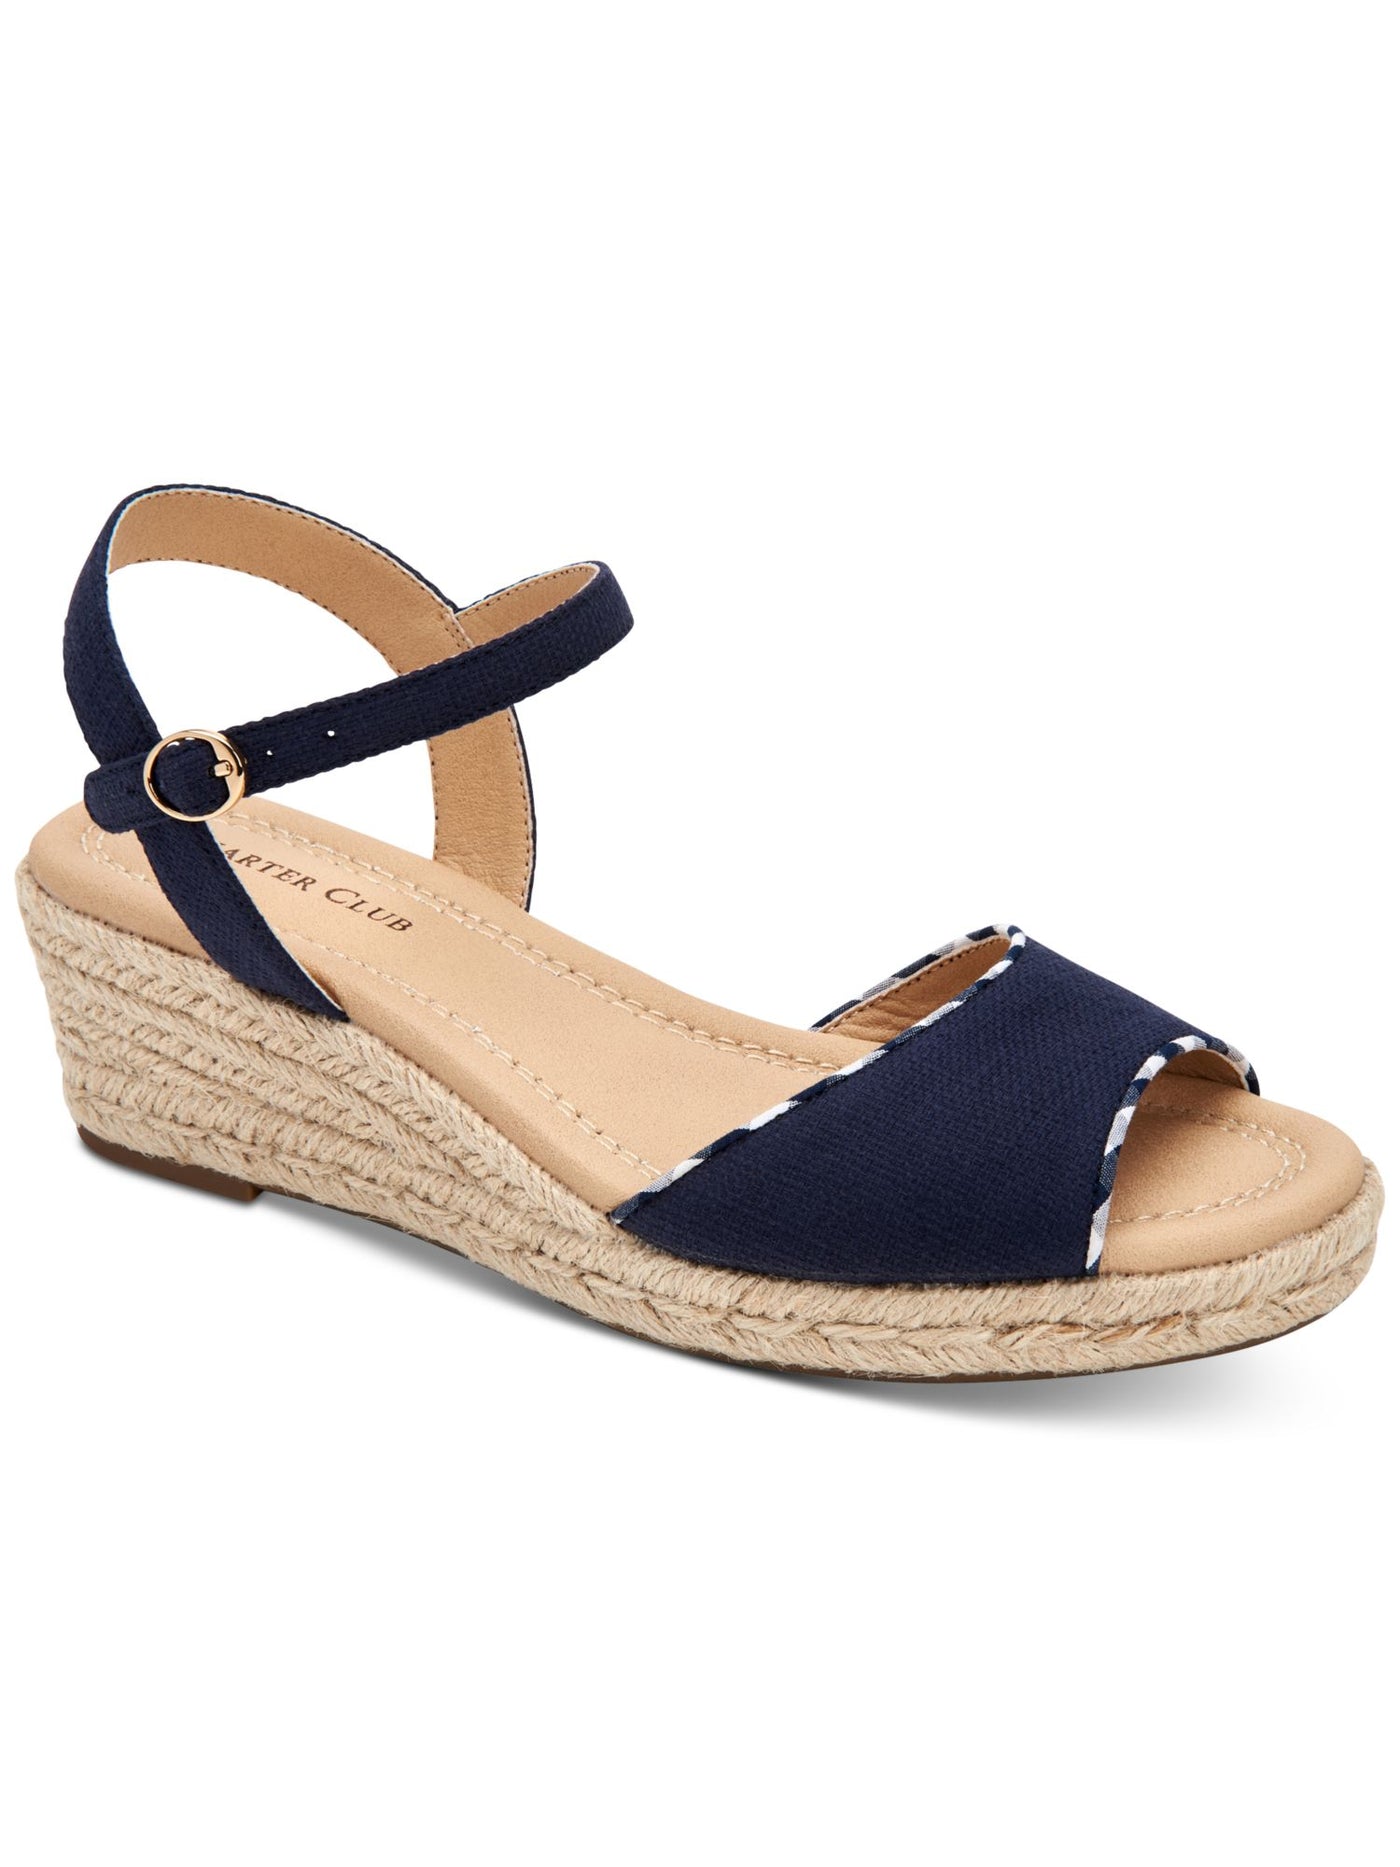 CHARTER CLUB Womens Navy 1/2" Platform Ankle Strap Strappy Luchia Round Toe Wedge Buckle Espadrille Shoes 11 M